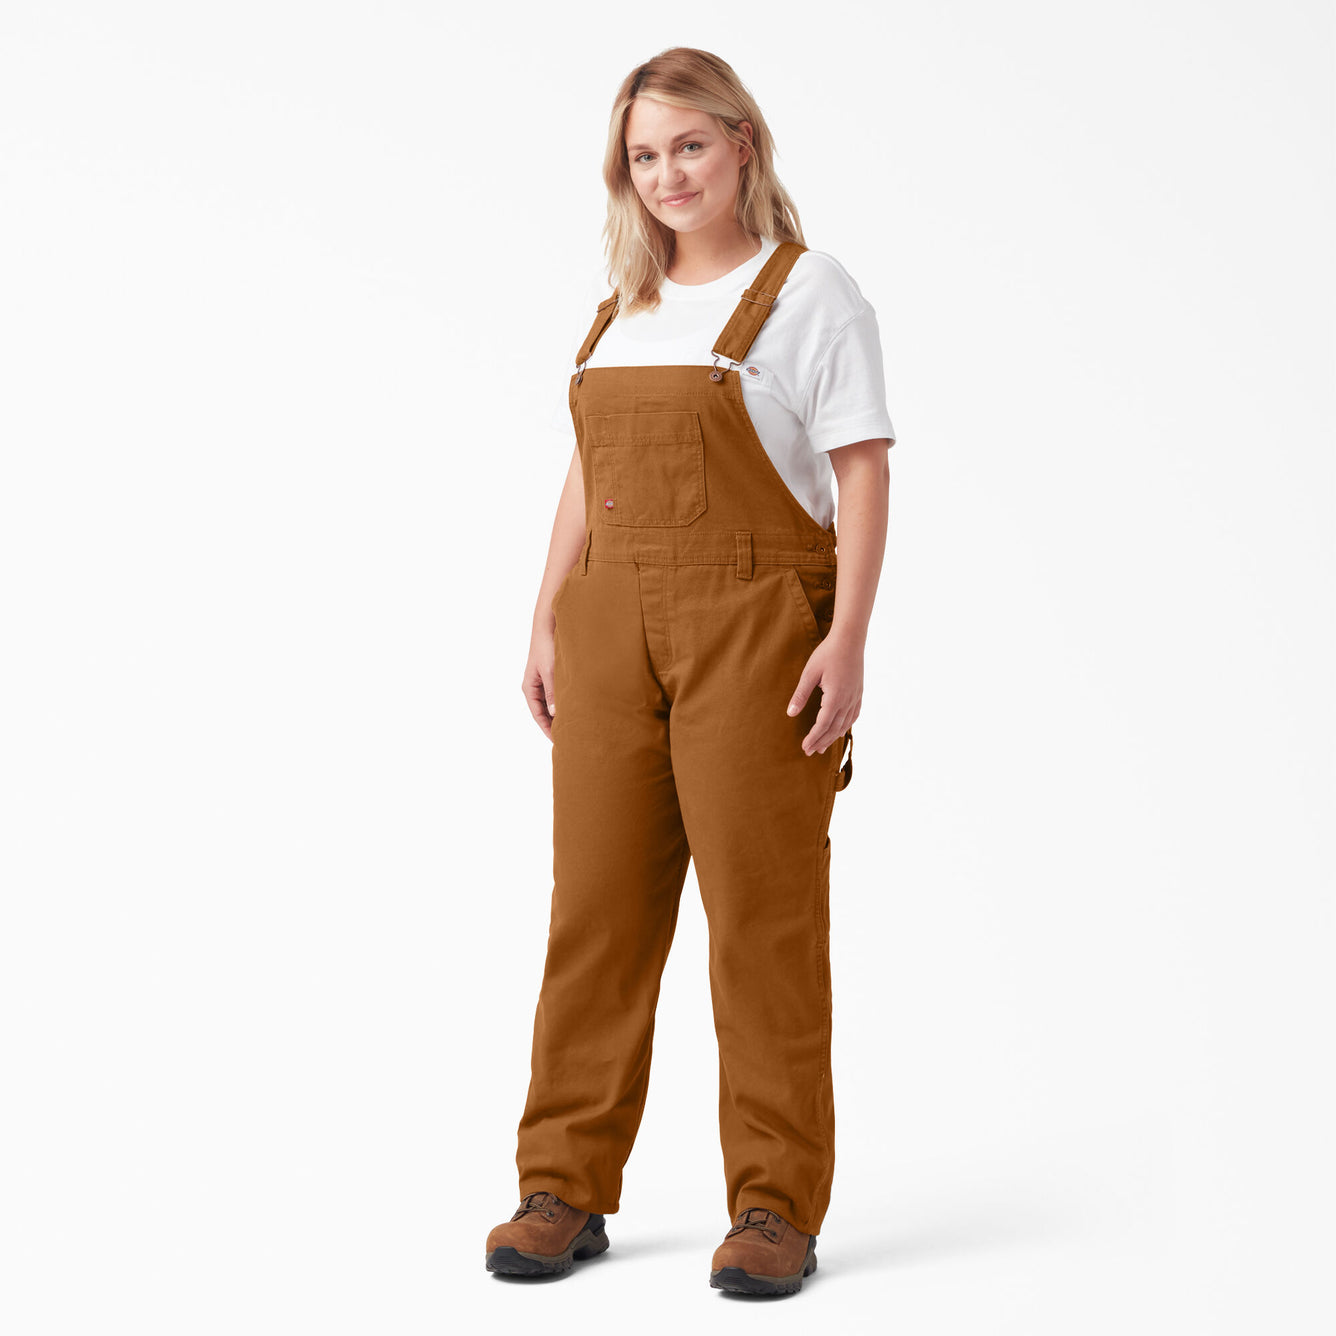 Dickies - #FBW206 - Made to Fit the Curvy Girl - Women's Plus